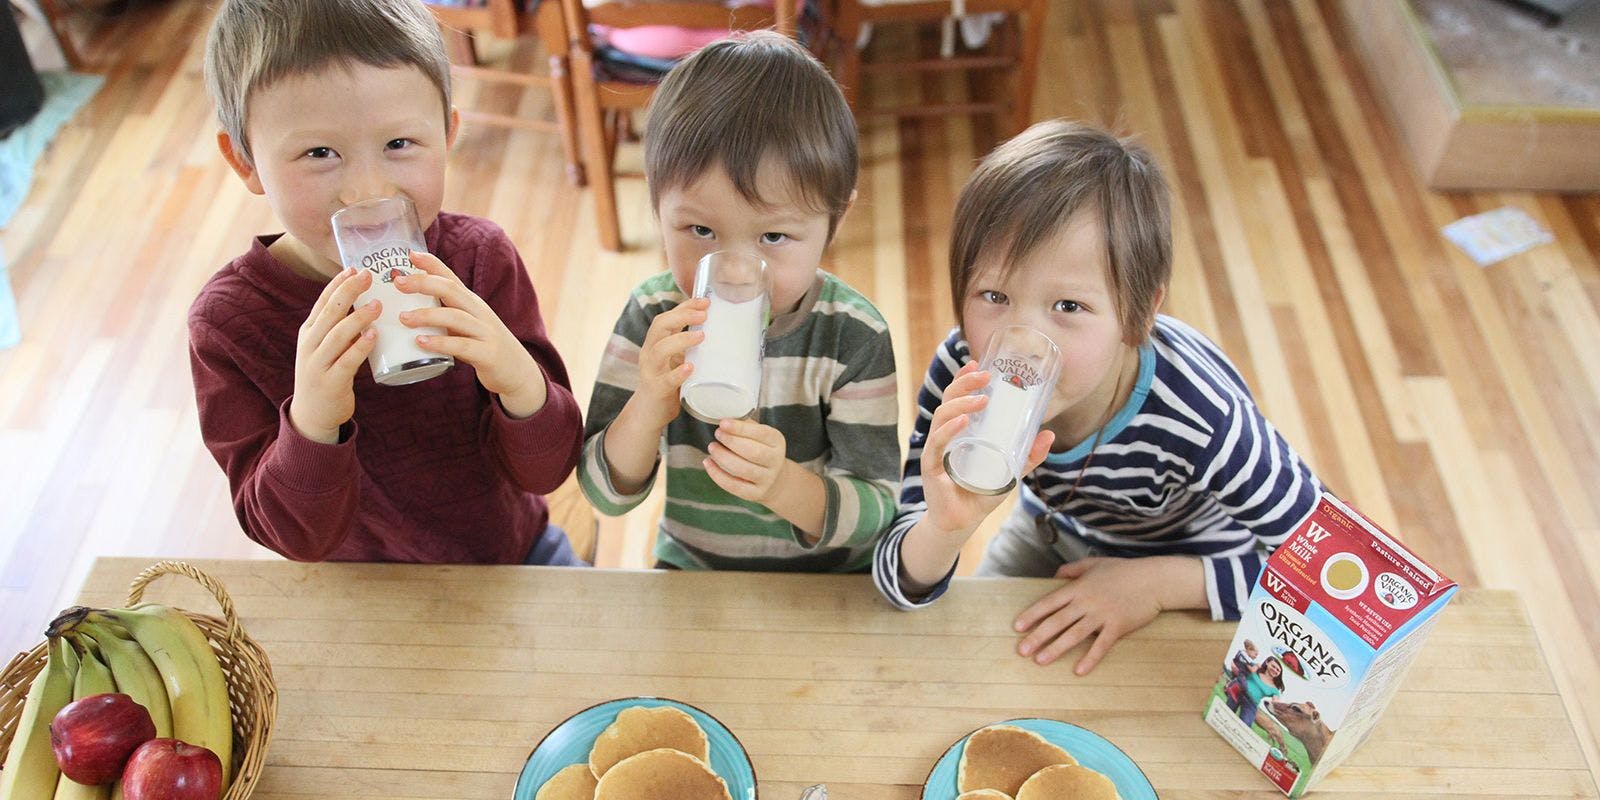 Three boys happily drink Organic Valley milk with their pancakes.